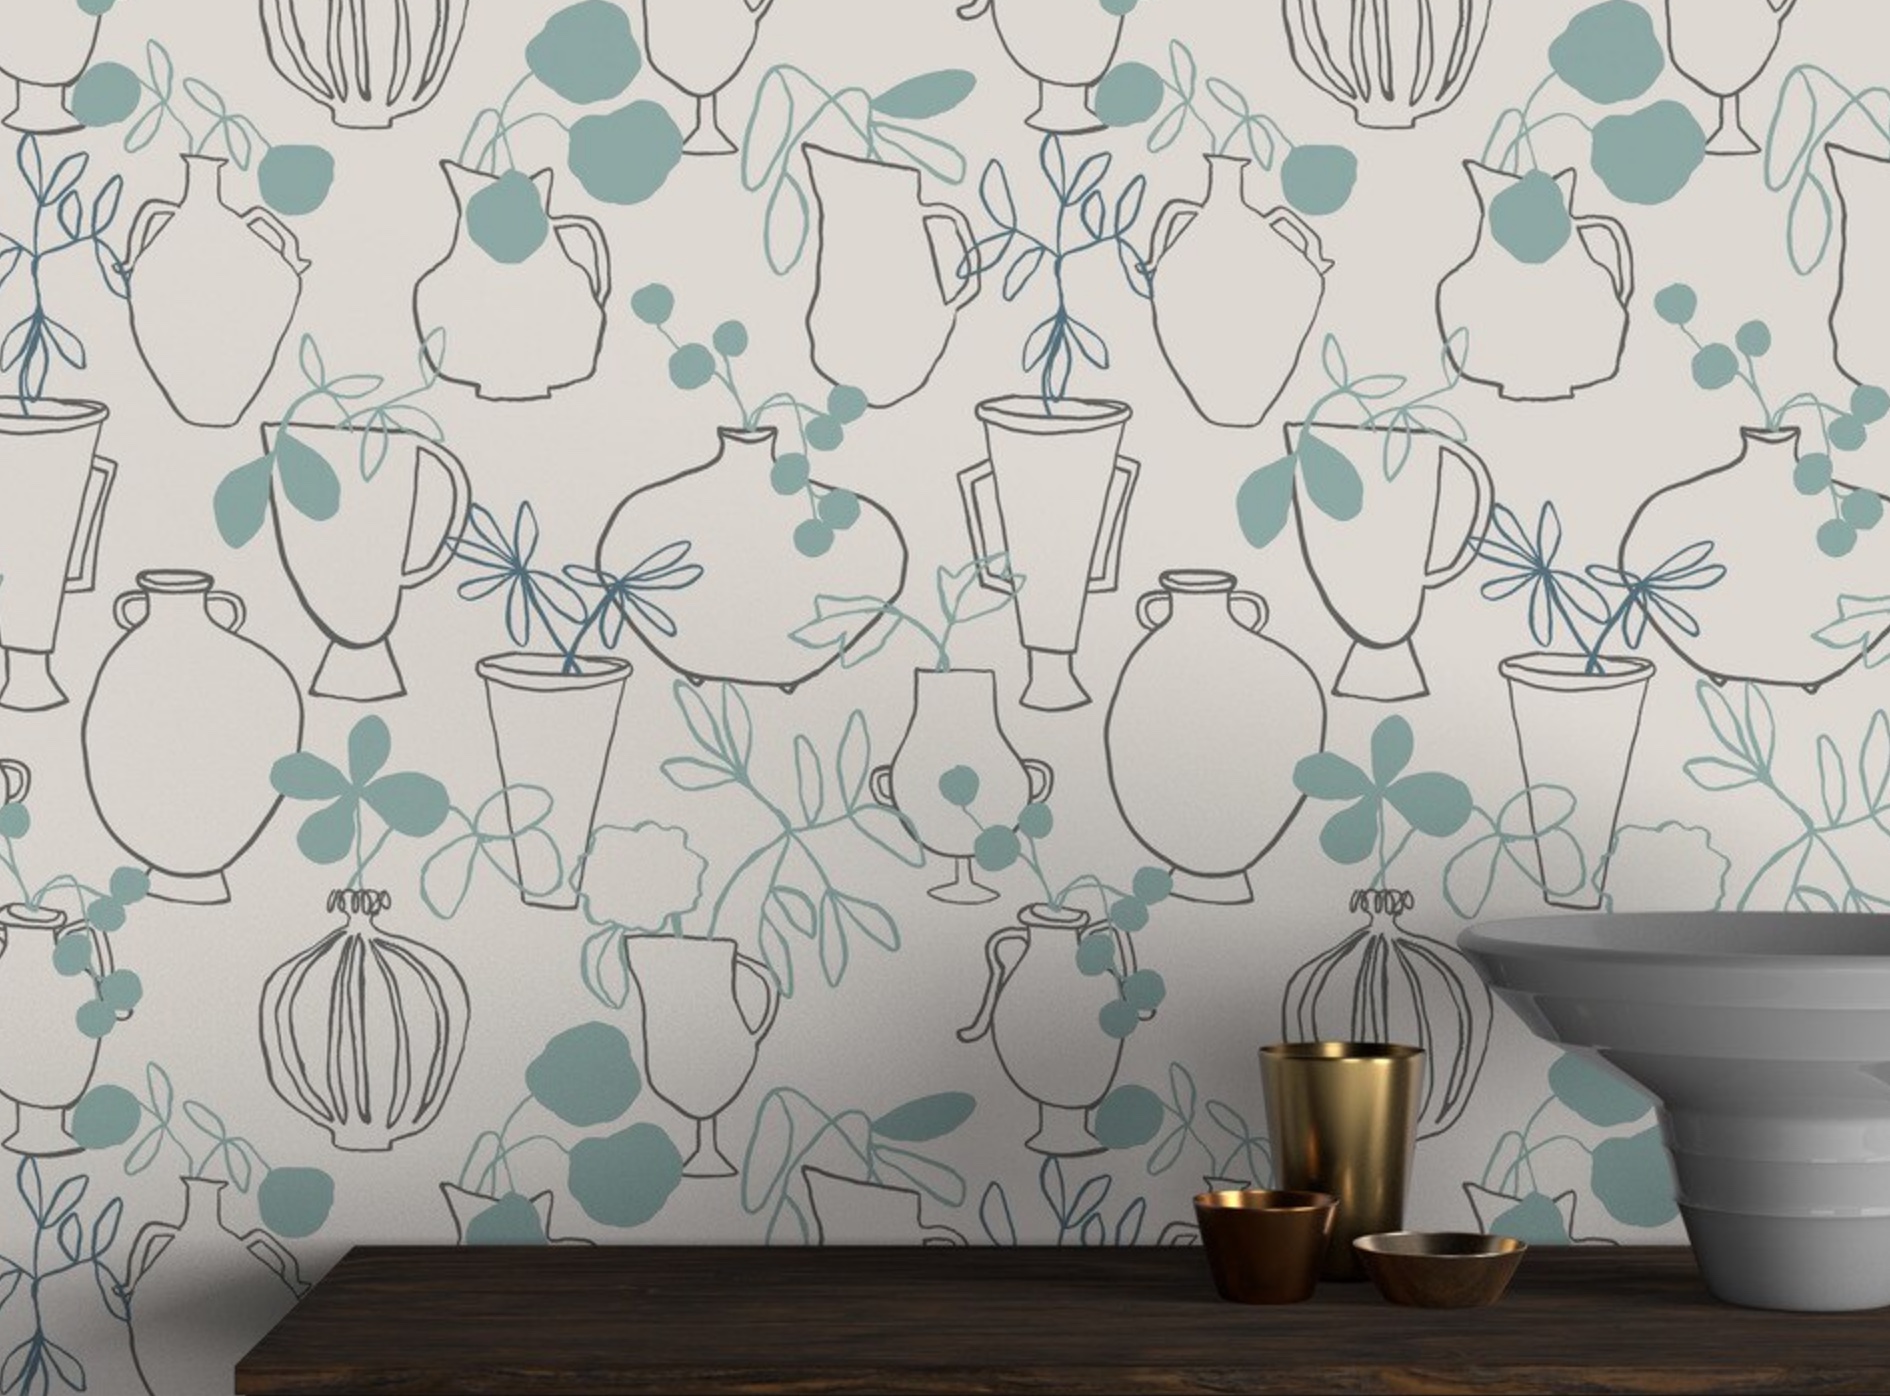 New Wall Couture Collection from Soicher Marin